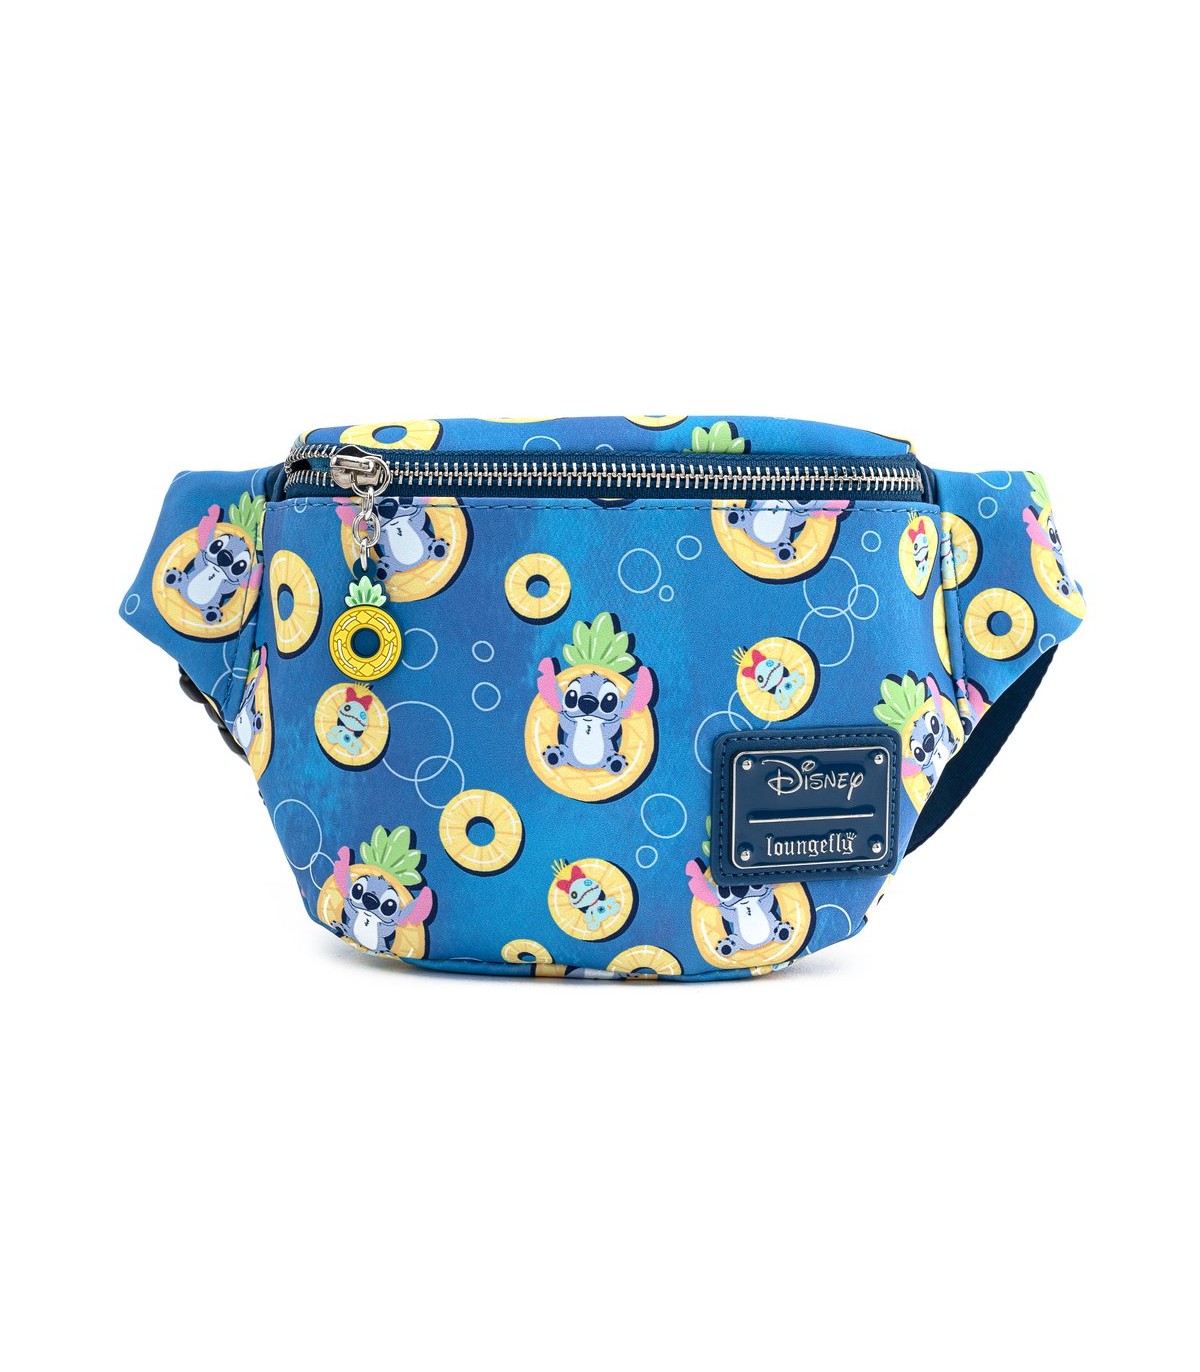 Loungefly Stitch Pineapple Floaty Fanny Pack